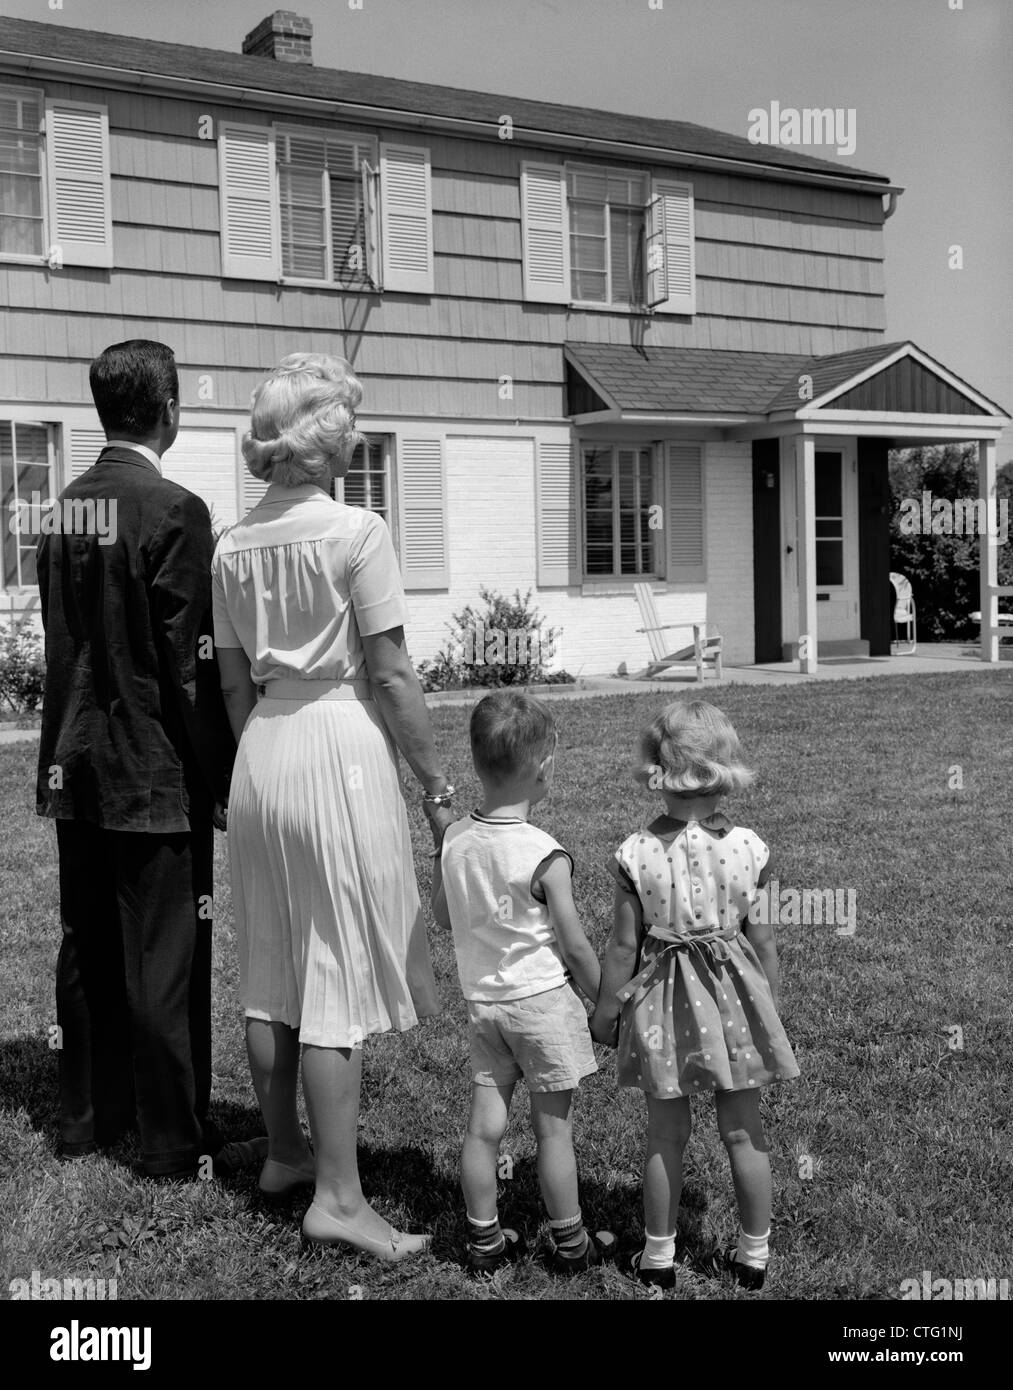 1950s 1960s FAMILY FATHER MOTHER SON DAUGHTER STANDING TOGETHER LOOKING AT SUBURBAN HOUSE Stock Photo